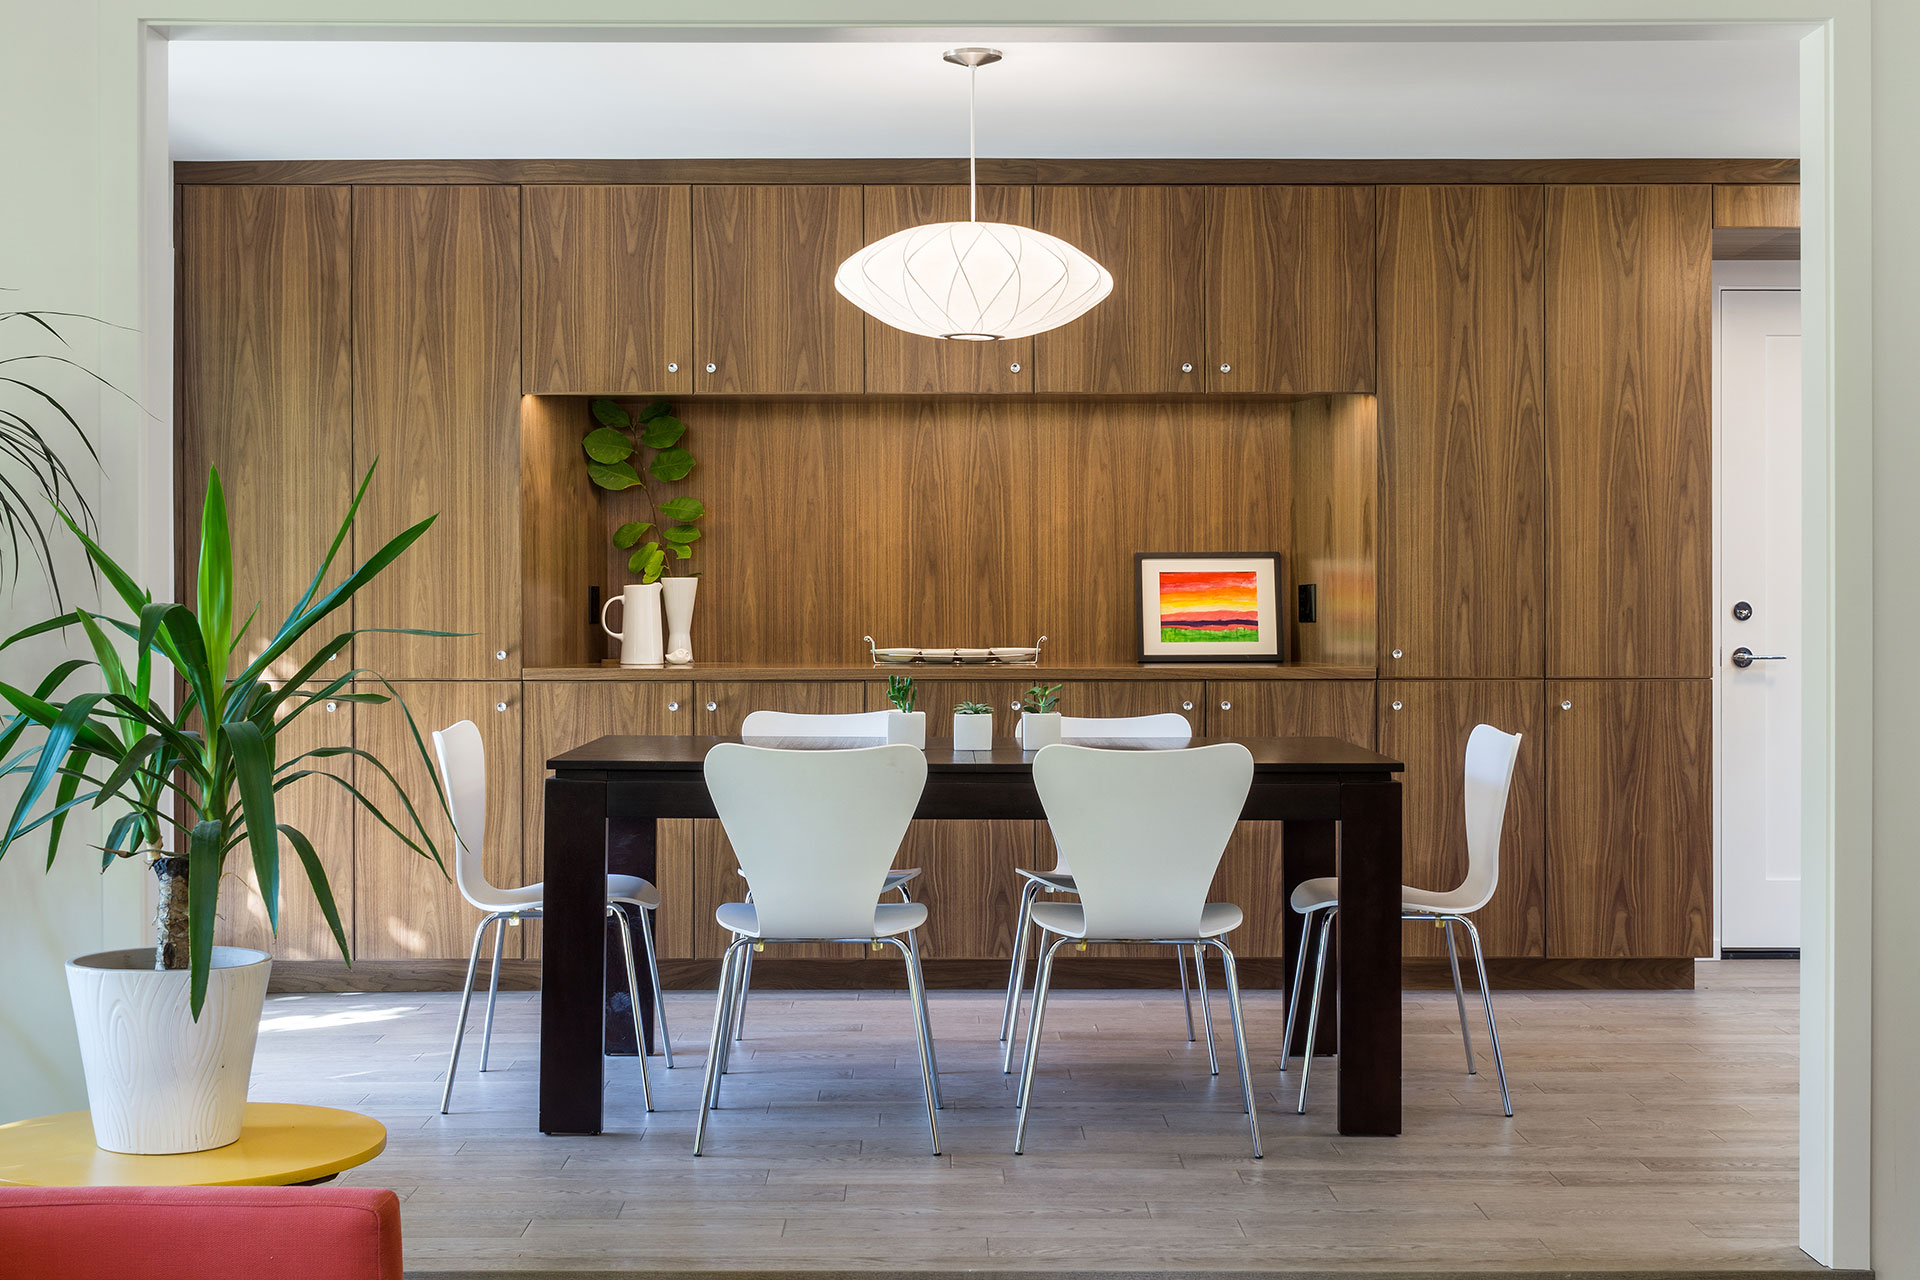 The renovated dining room after the residential remodel features a built-in buffet crafted of plain-sliced walnut.